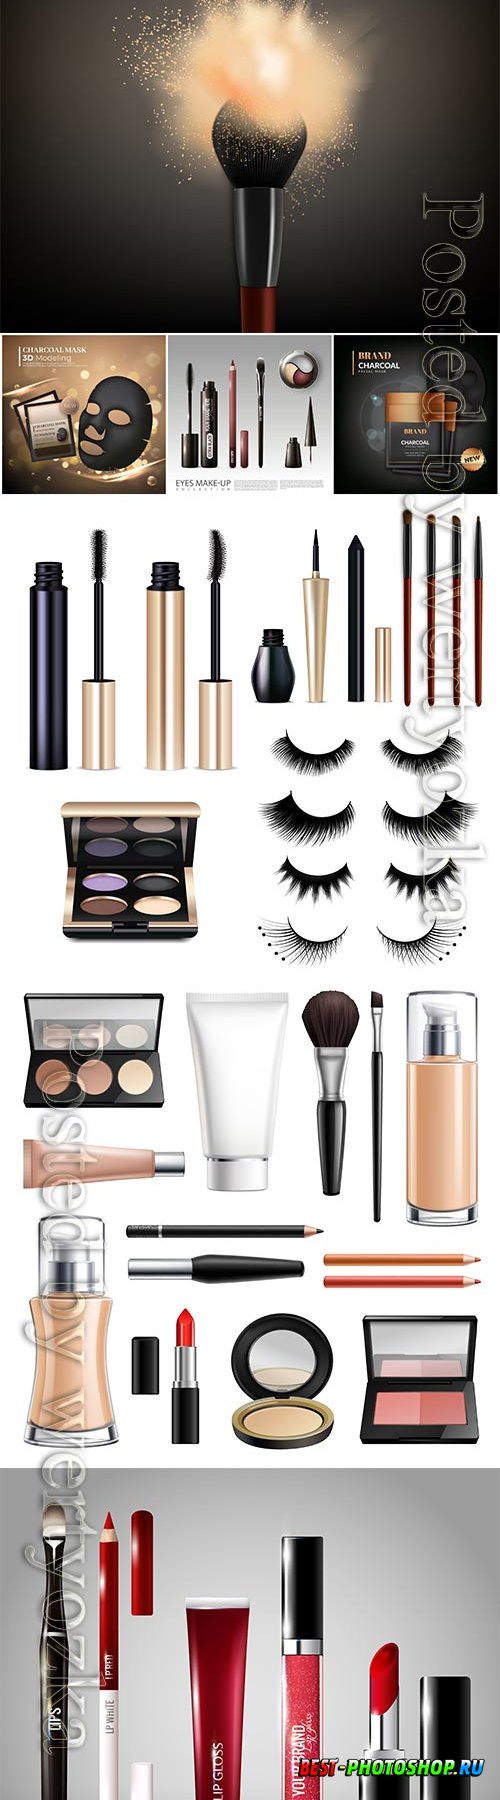 Foundation cosmetology products collection